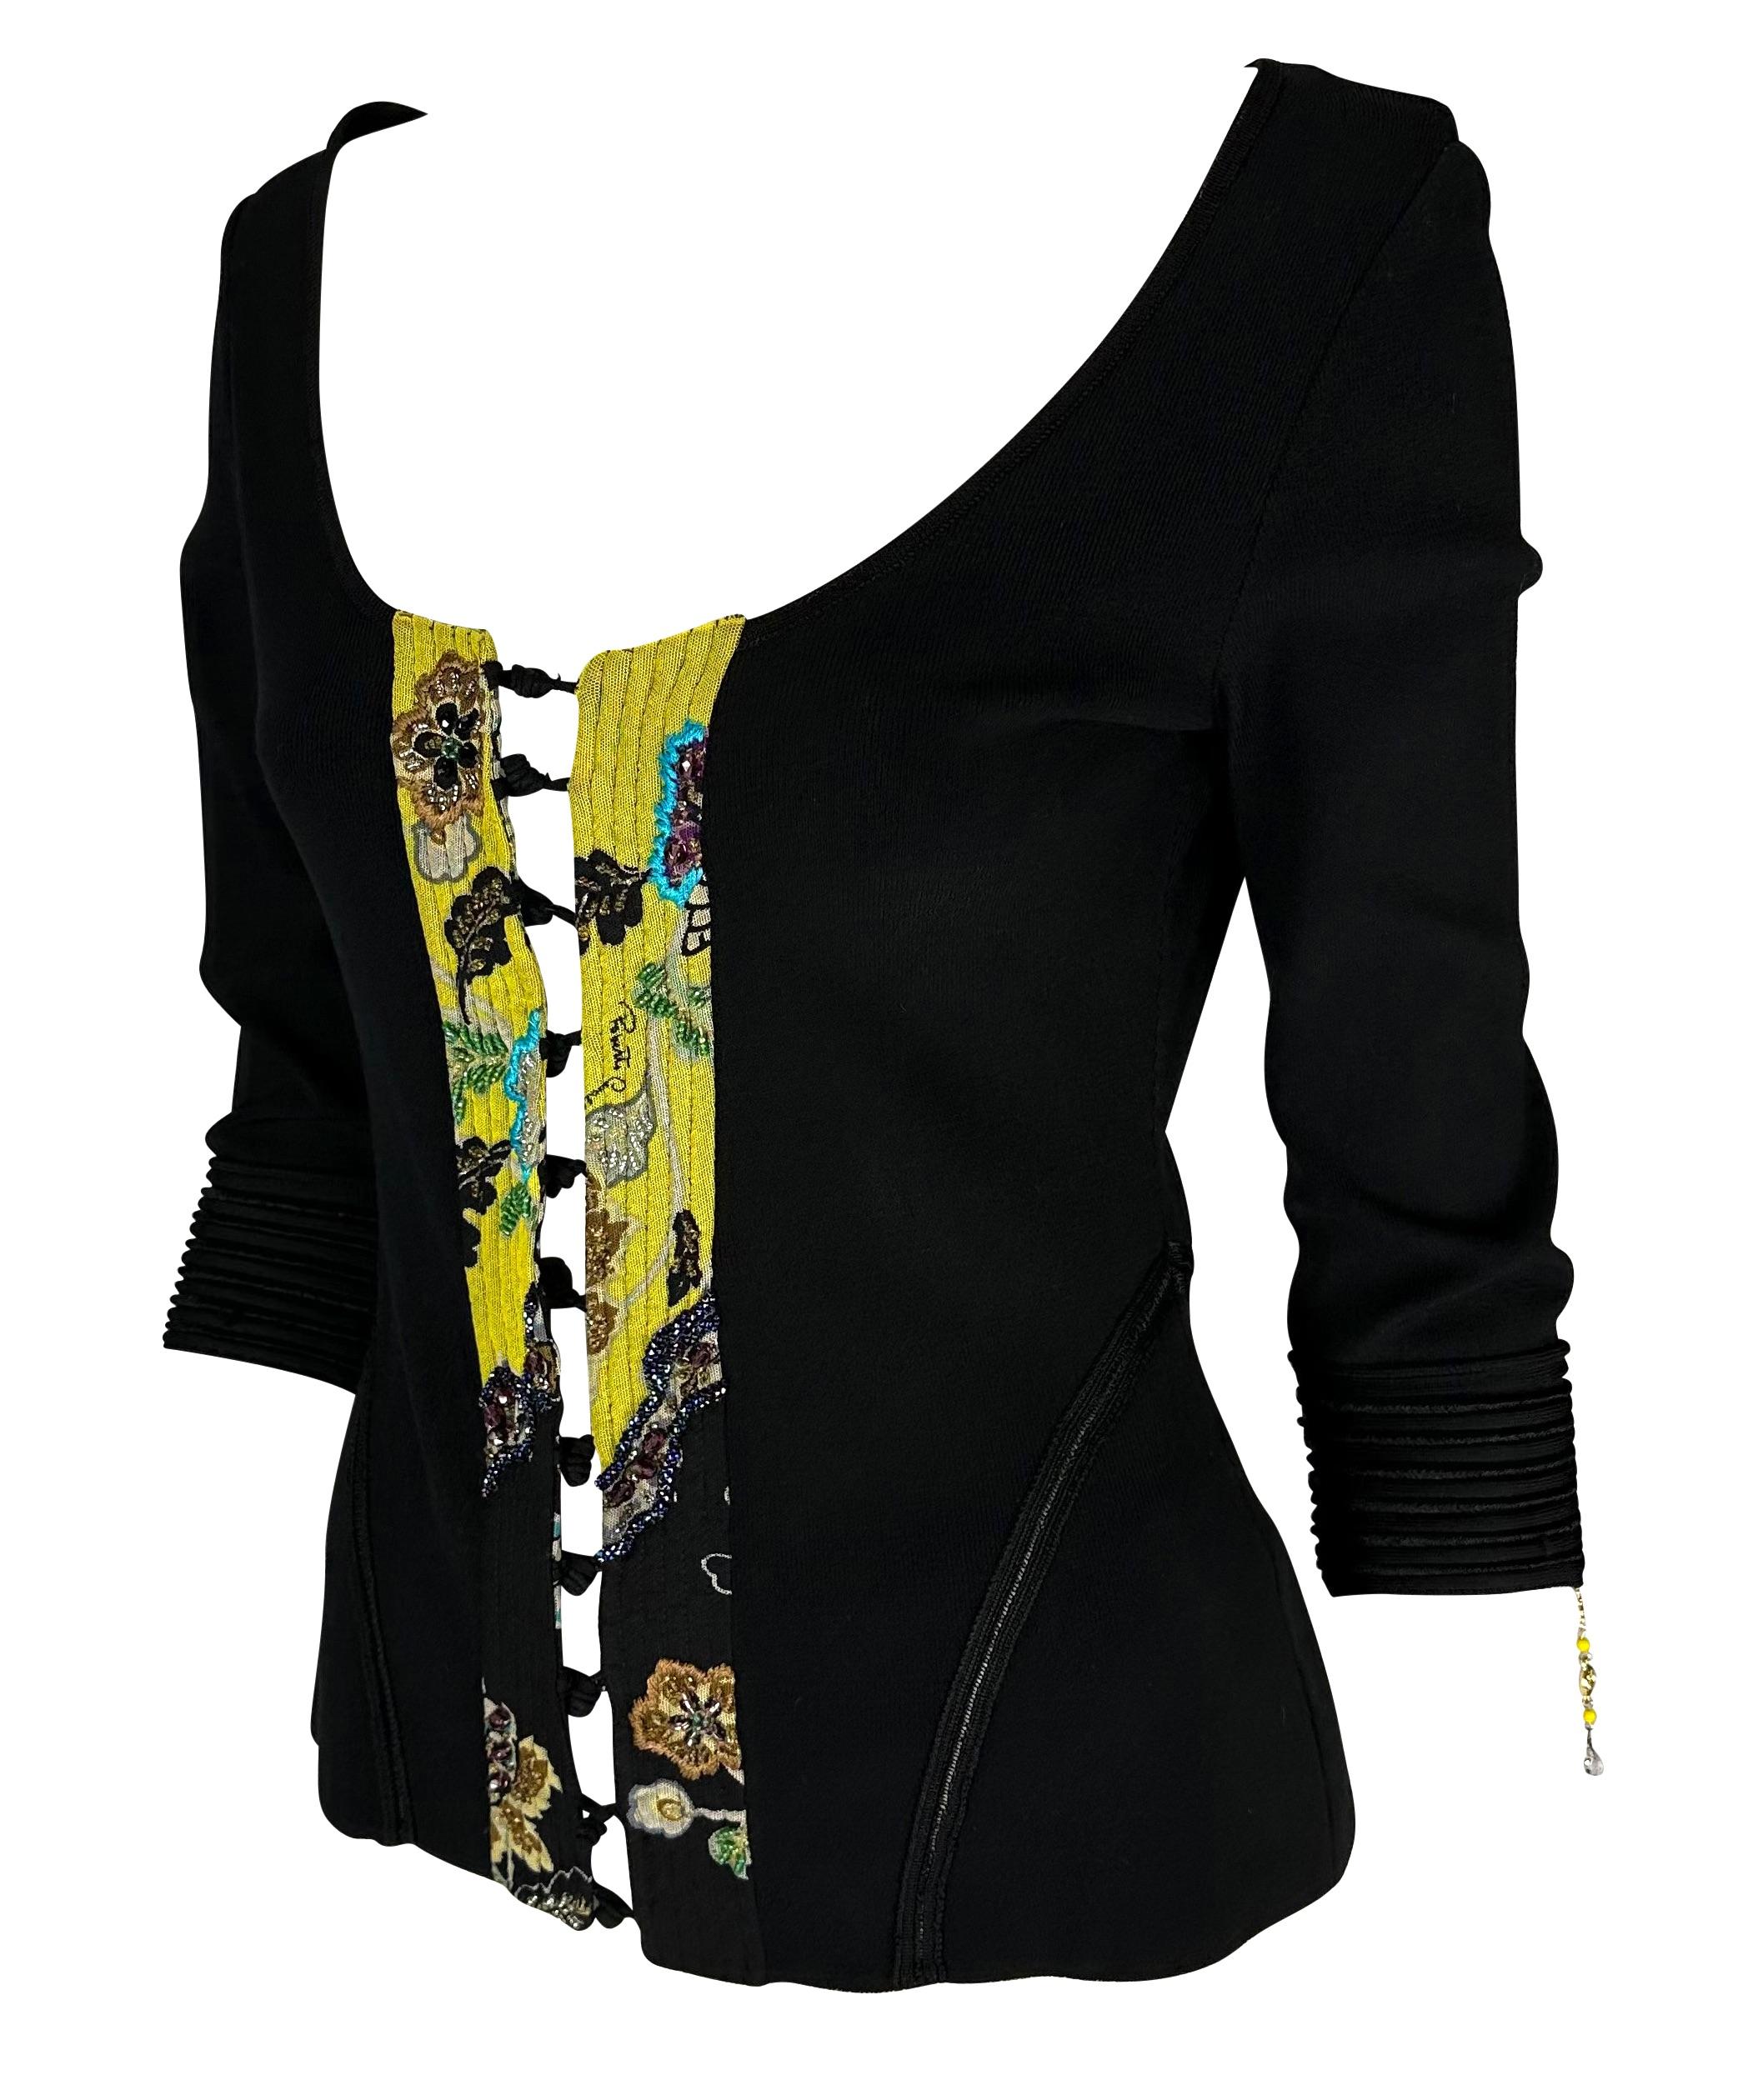 S/S 2003 Roberto Cavalli Charm Yellow Chinoiserie Beaded Black Sweater Excellent état - En vente à West Hollywood, CA